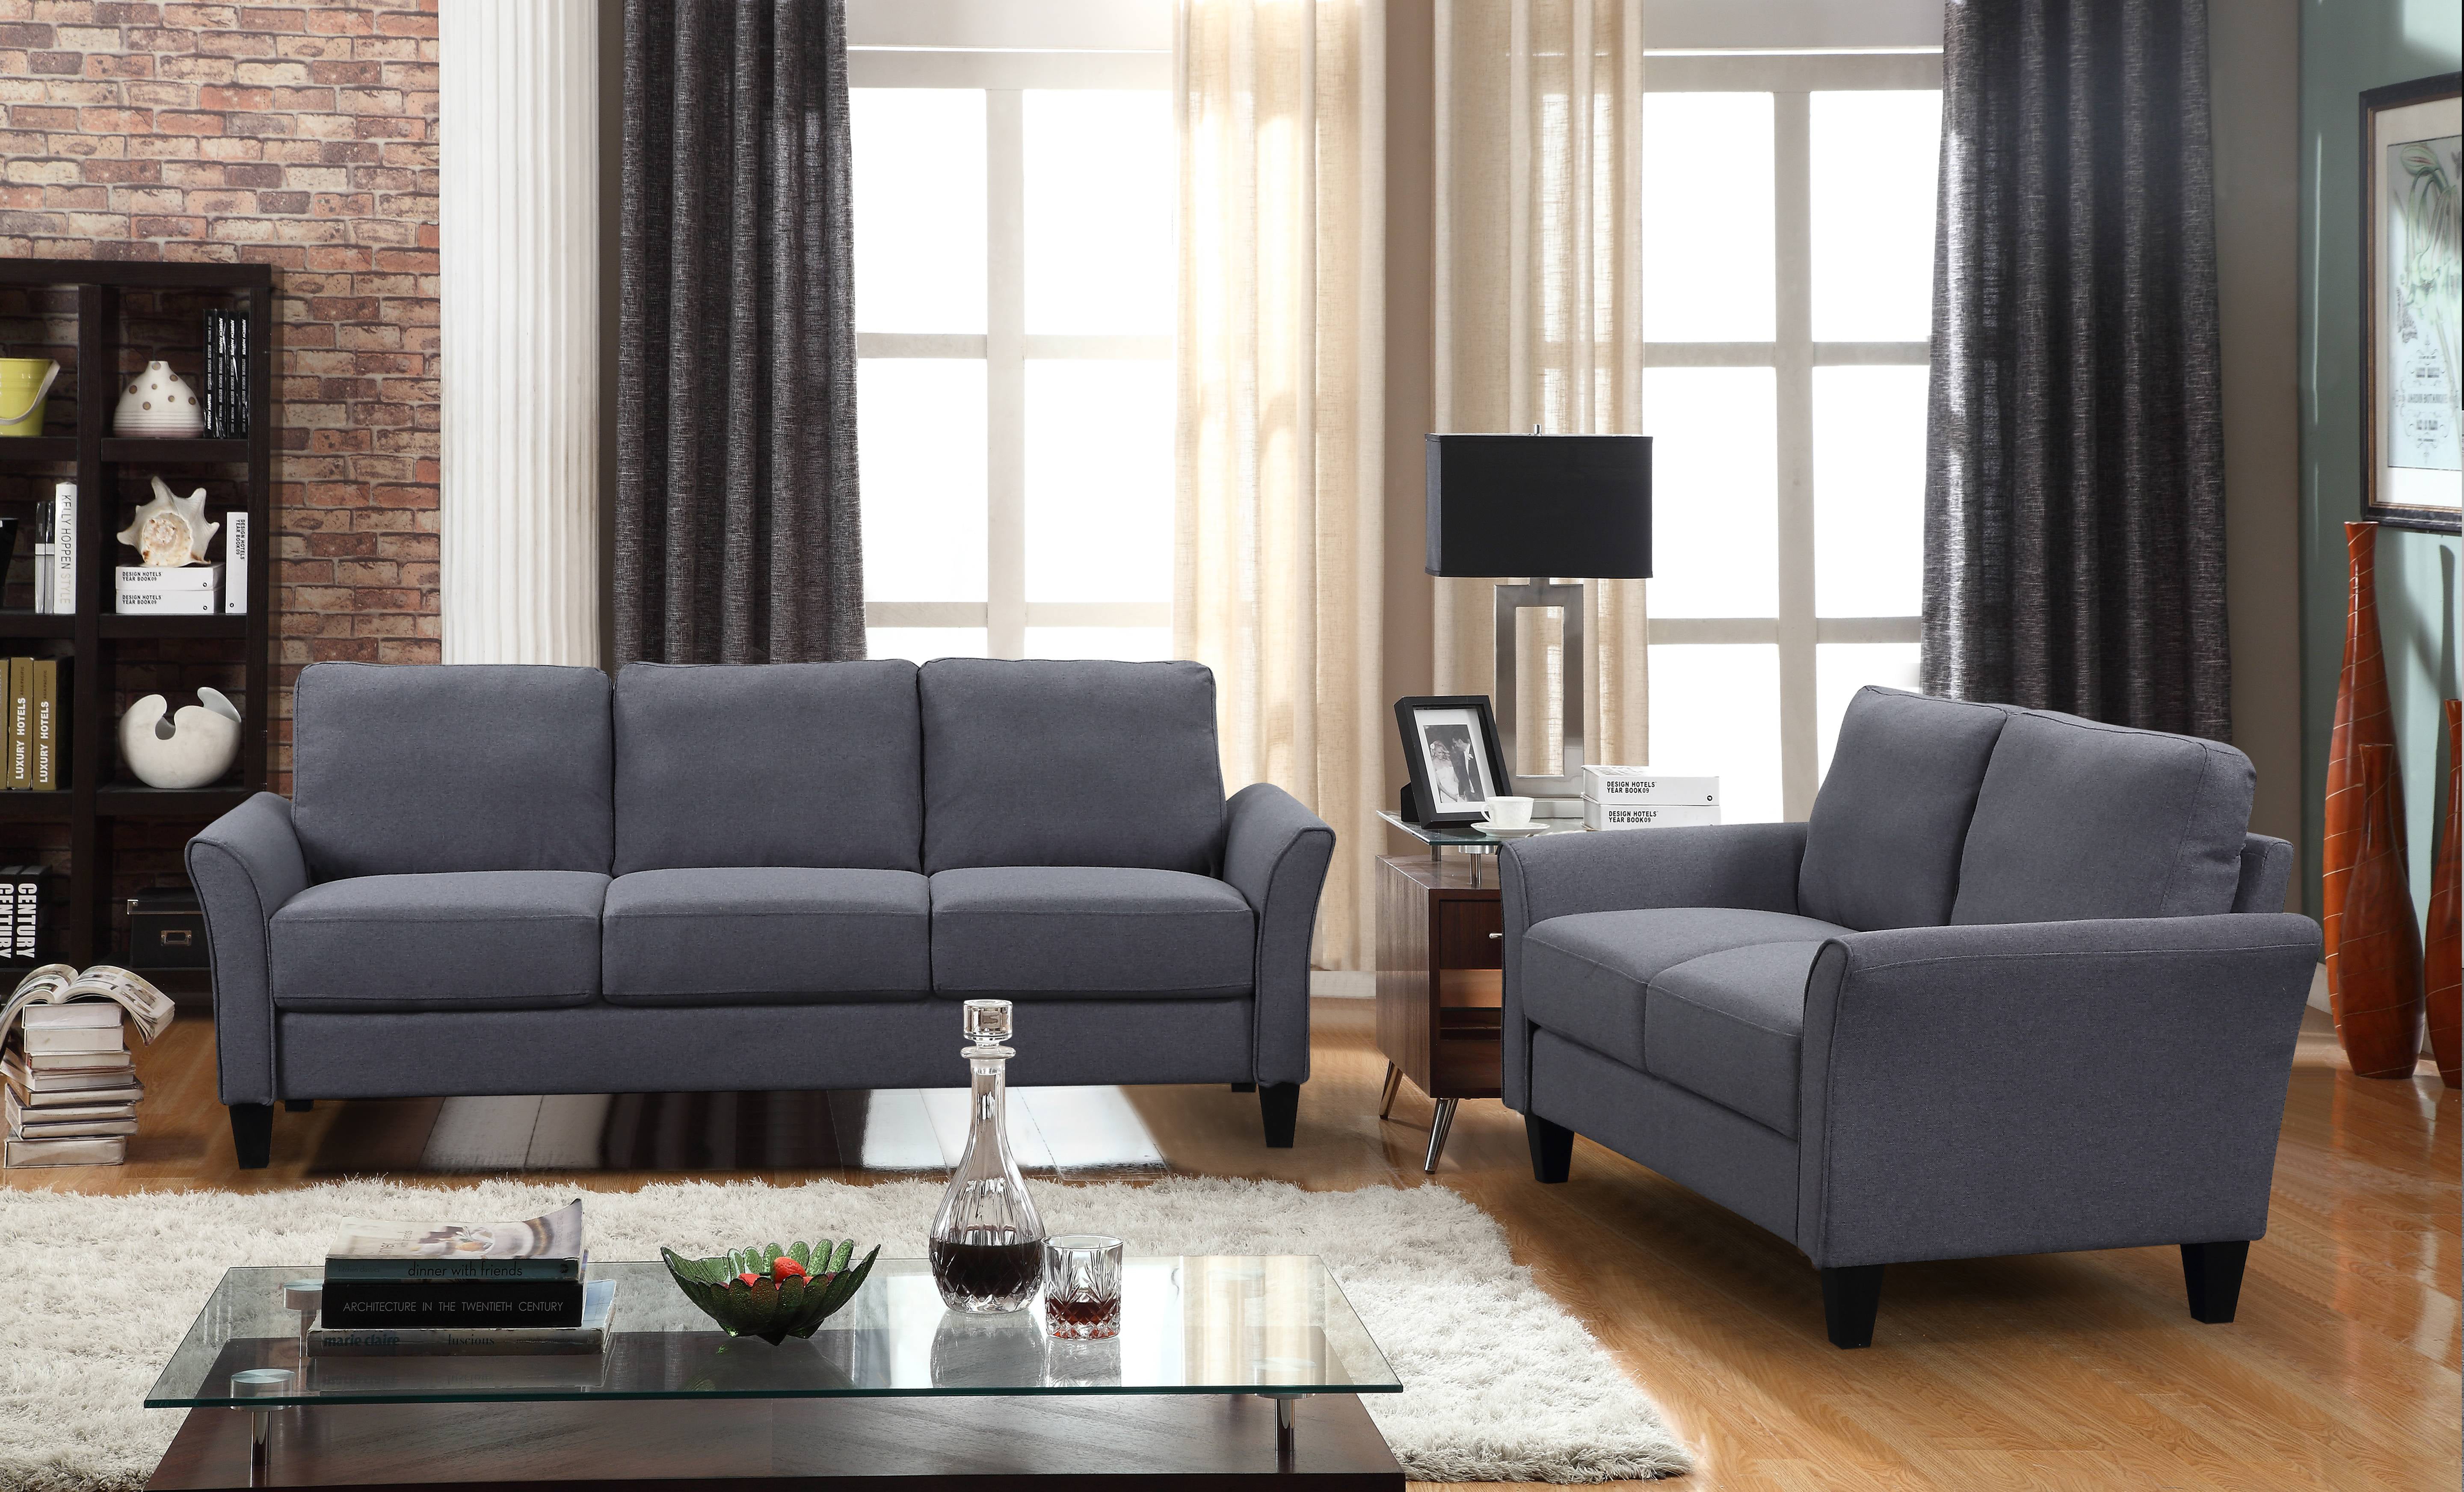 Living Room Sofa Set Ikea : Clearance! Sectional Couch And Sofa Set For ...